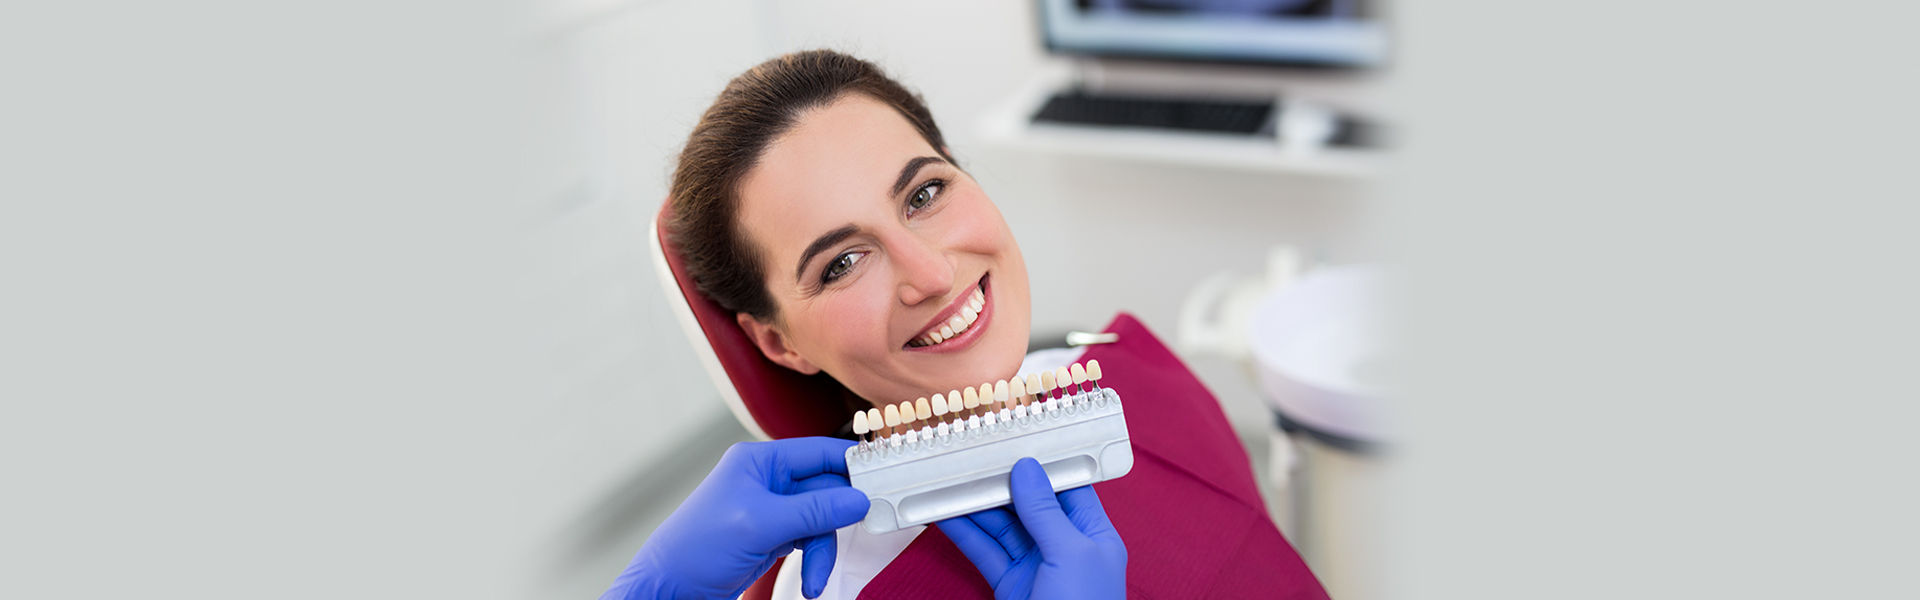 Tips to Care for Your Dental Veneers for Long-term Success  